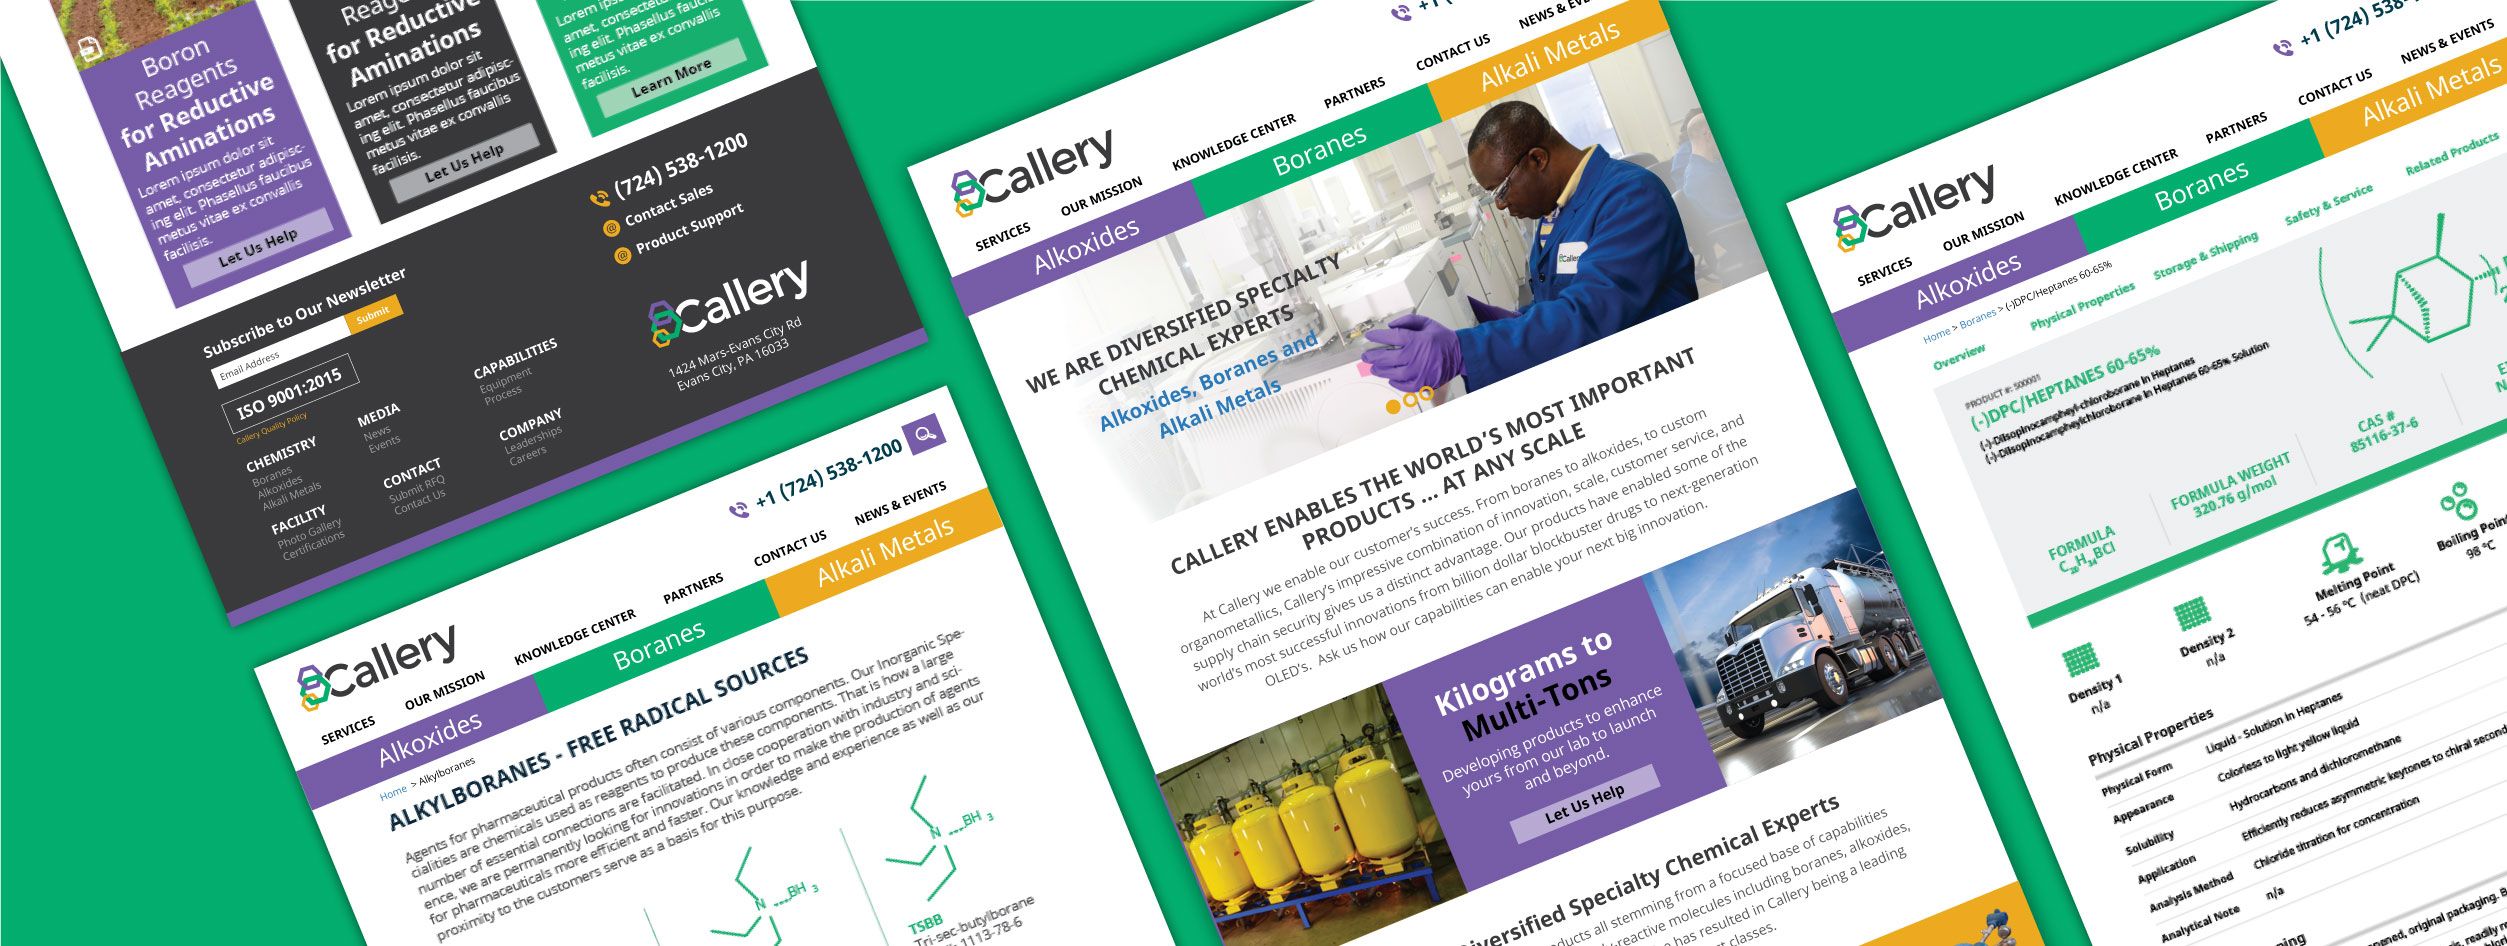 Callery: Integrated Marketing Campaing